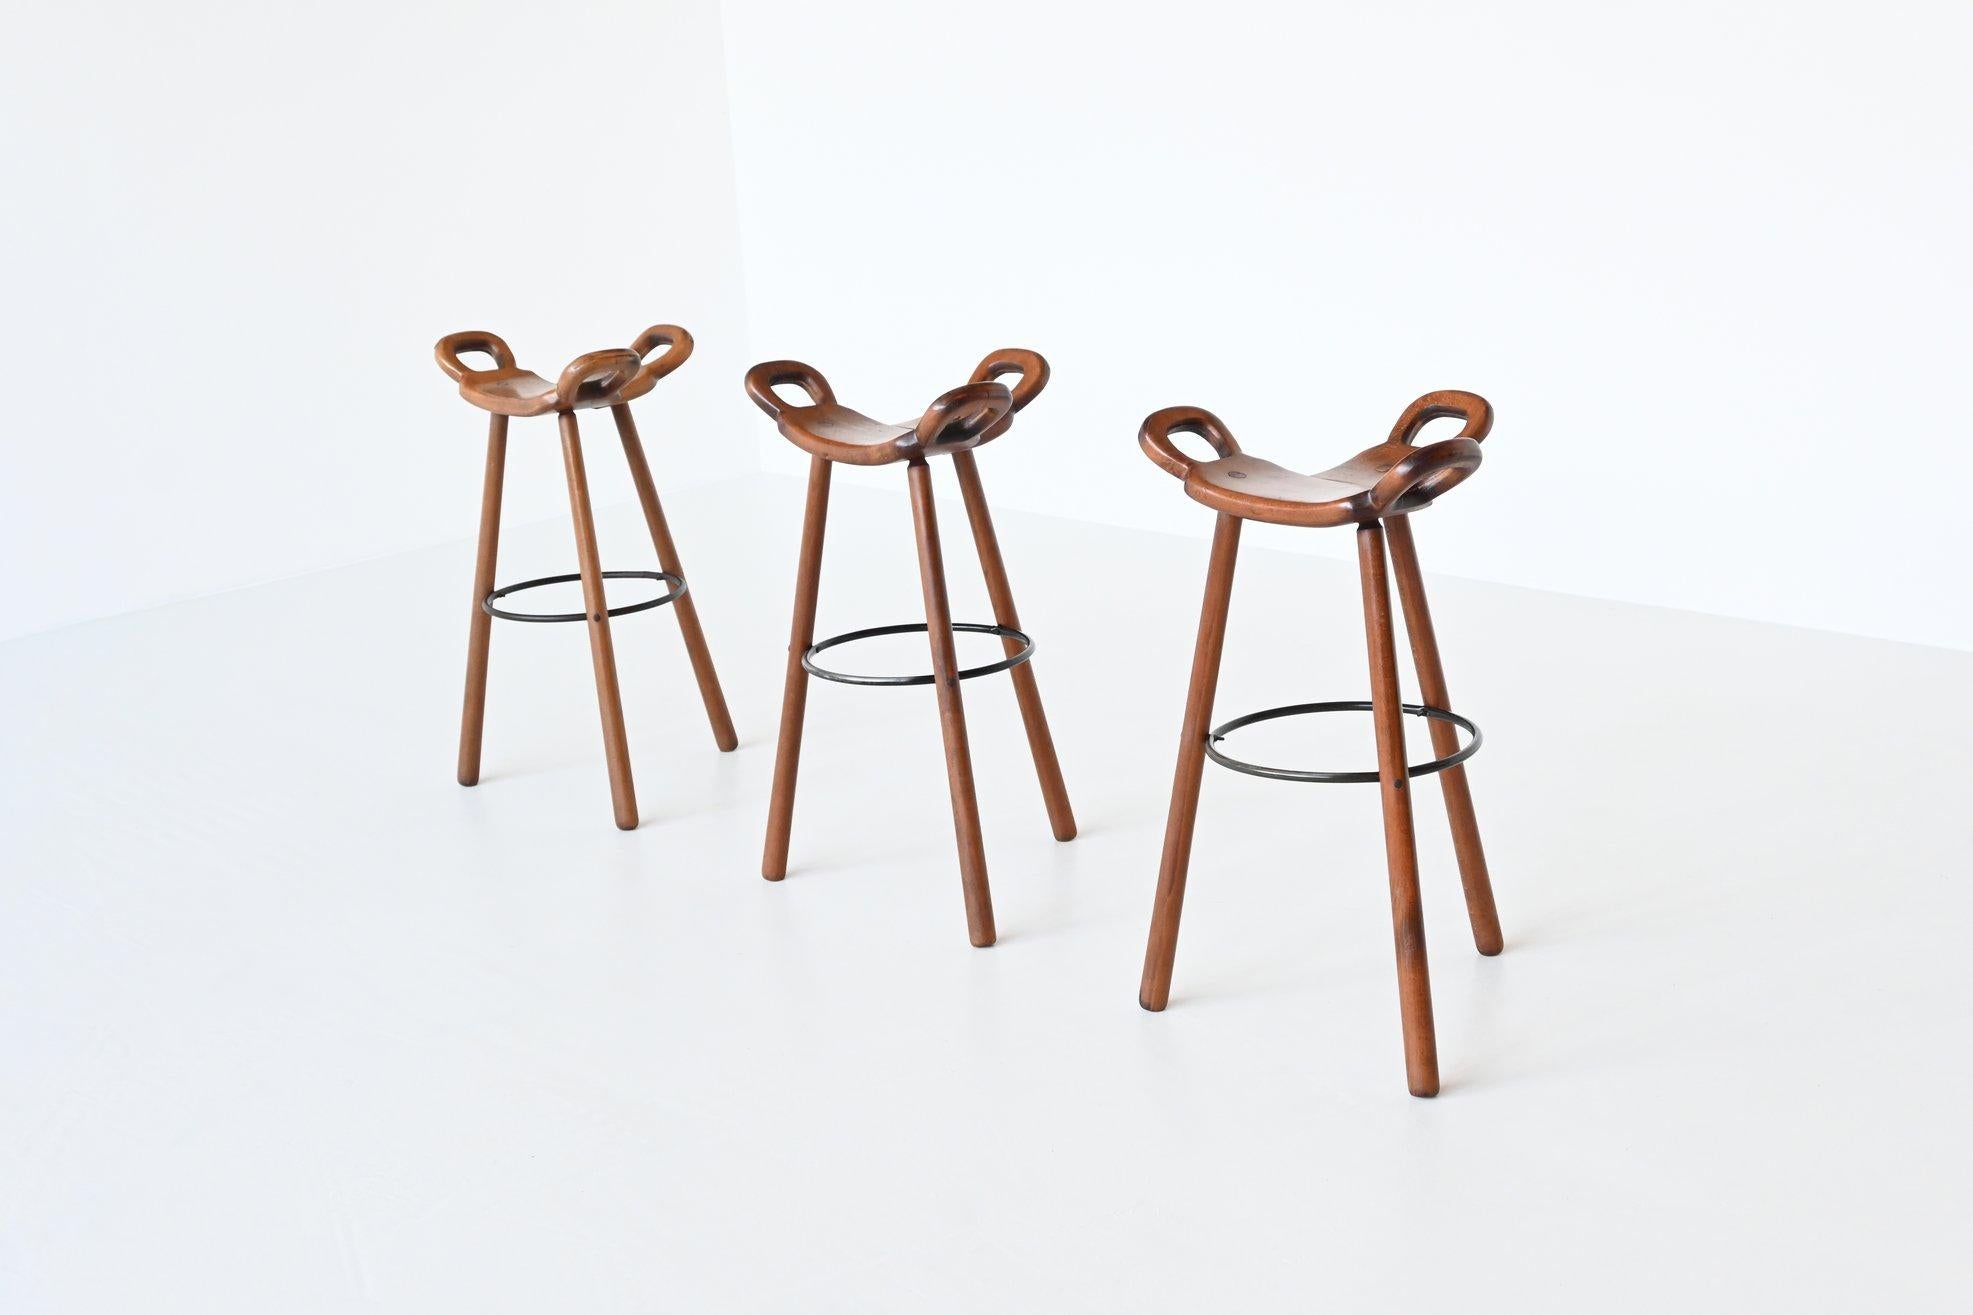 Fantastic set of three brutalist Marbella bar stools manufactured by Confonorm, Spain 1970. These stools are made of dark stained solid beech wood and they have a solid metal foot rest ring to put your feet on and strengthen the construction. The